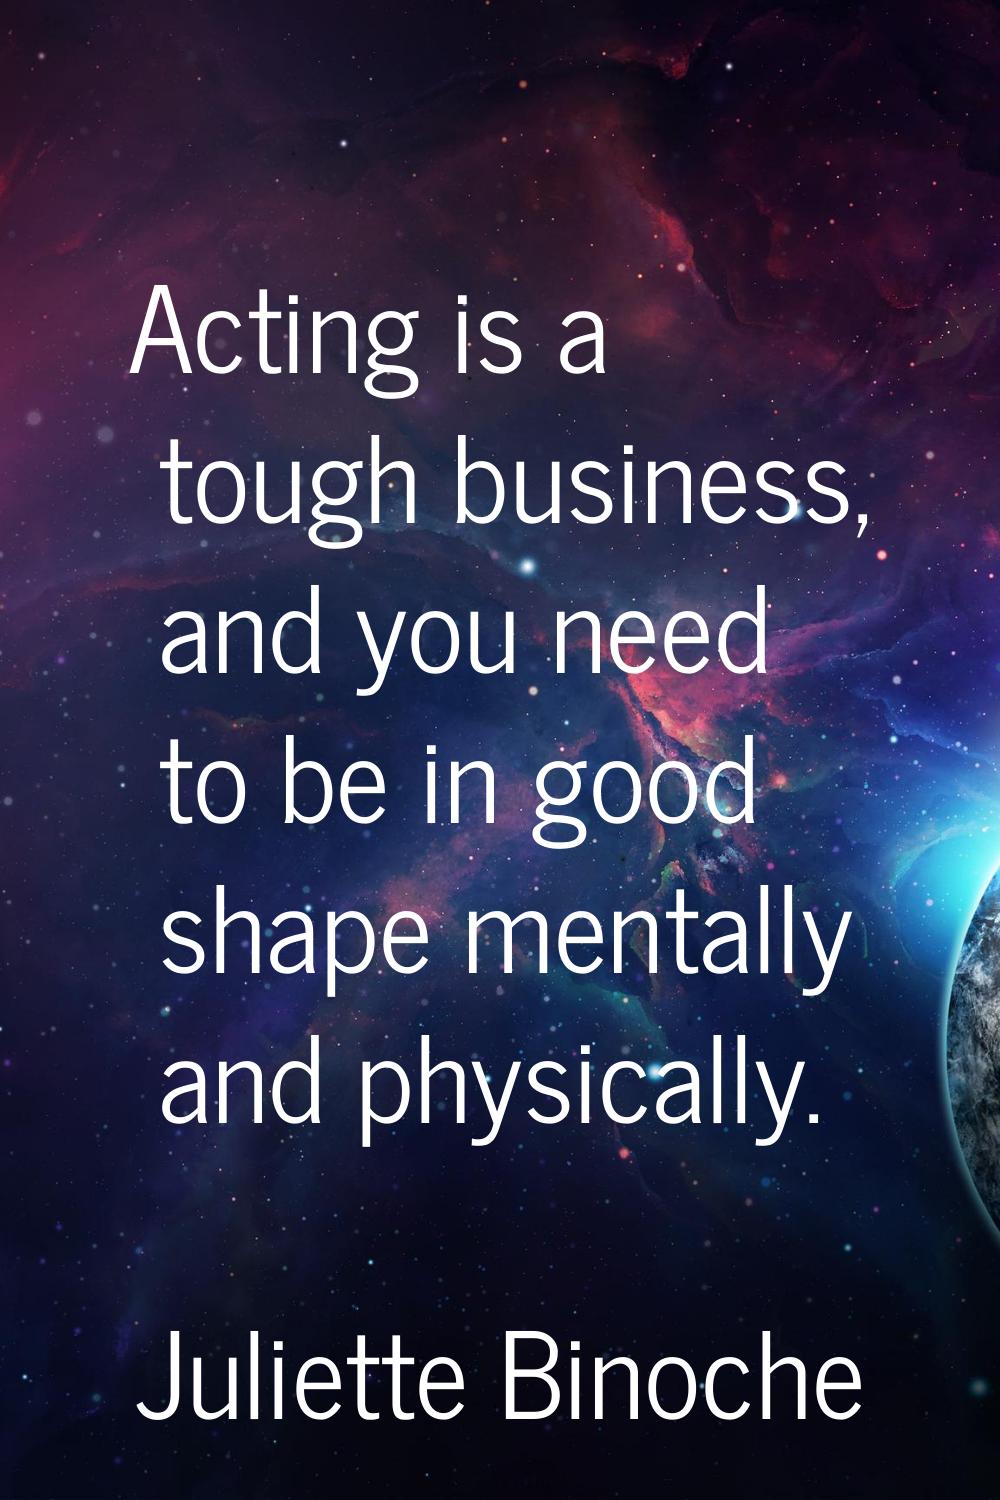 Acting is a tough business, and you need to be in good shape mentally and physically.